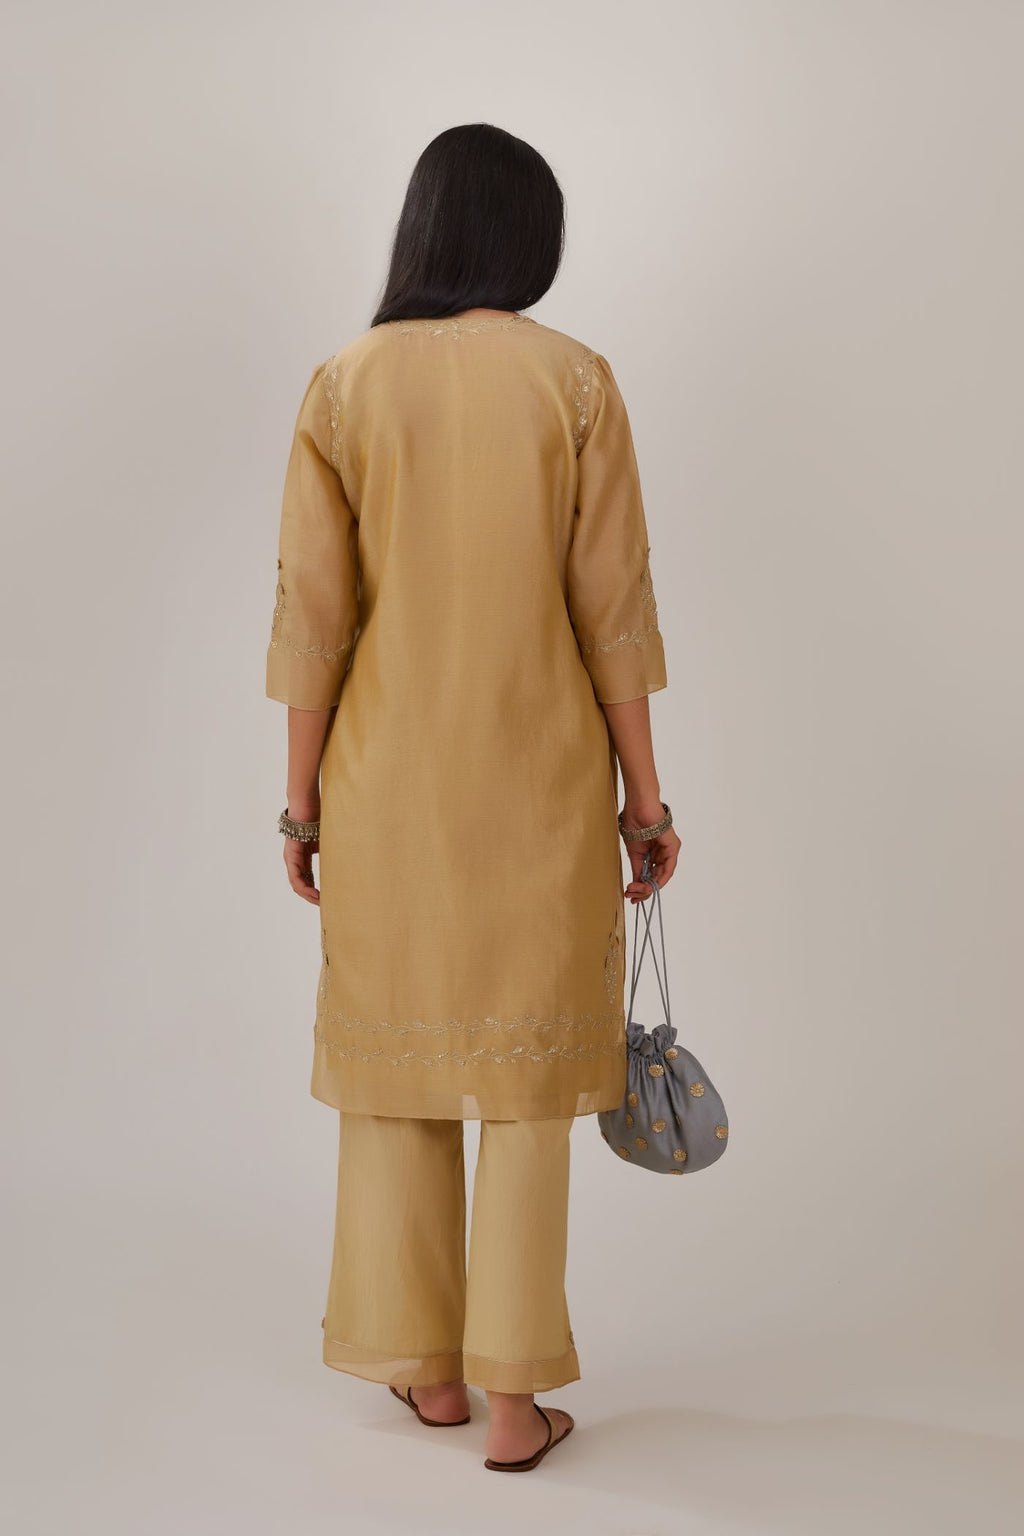 Olive silk chanderi short kurta detailed with gota embroidery and highlighted with bugle beads and sequins, paired with olive straight pants with gota and silk chanderi fabric detaling at bottom hem